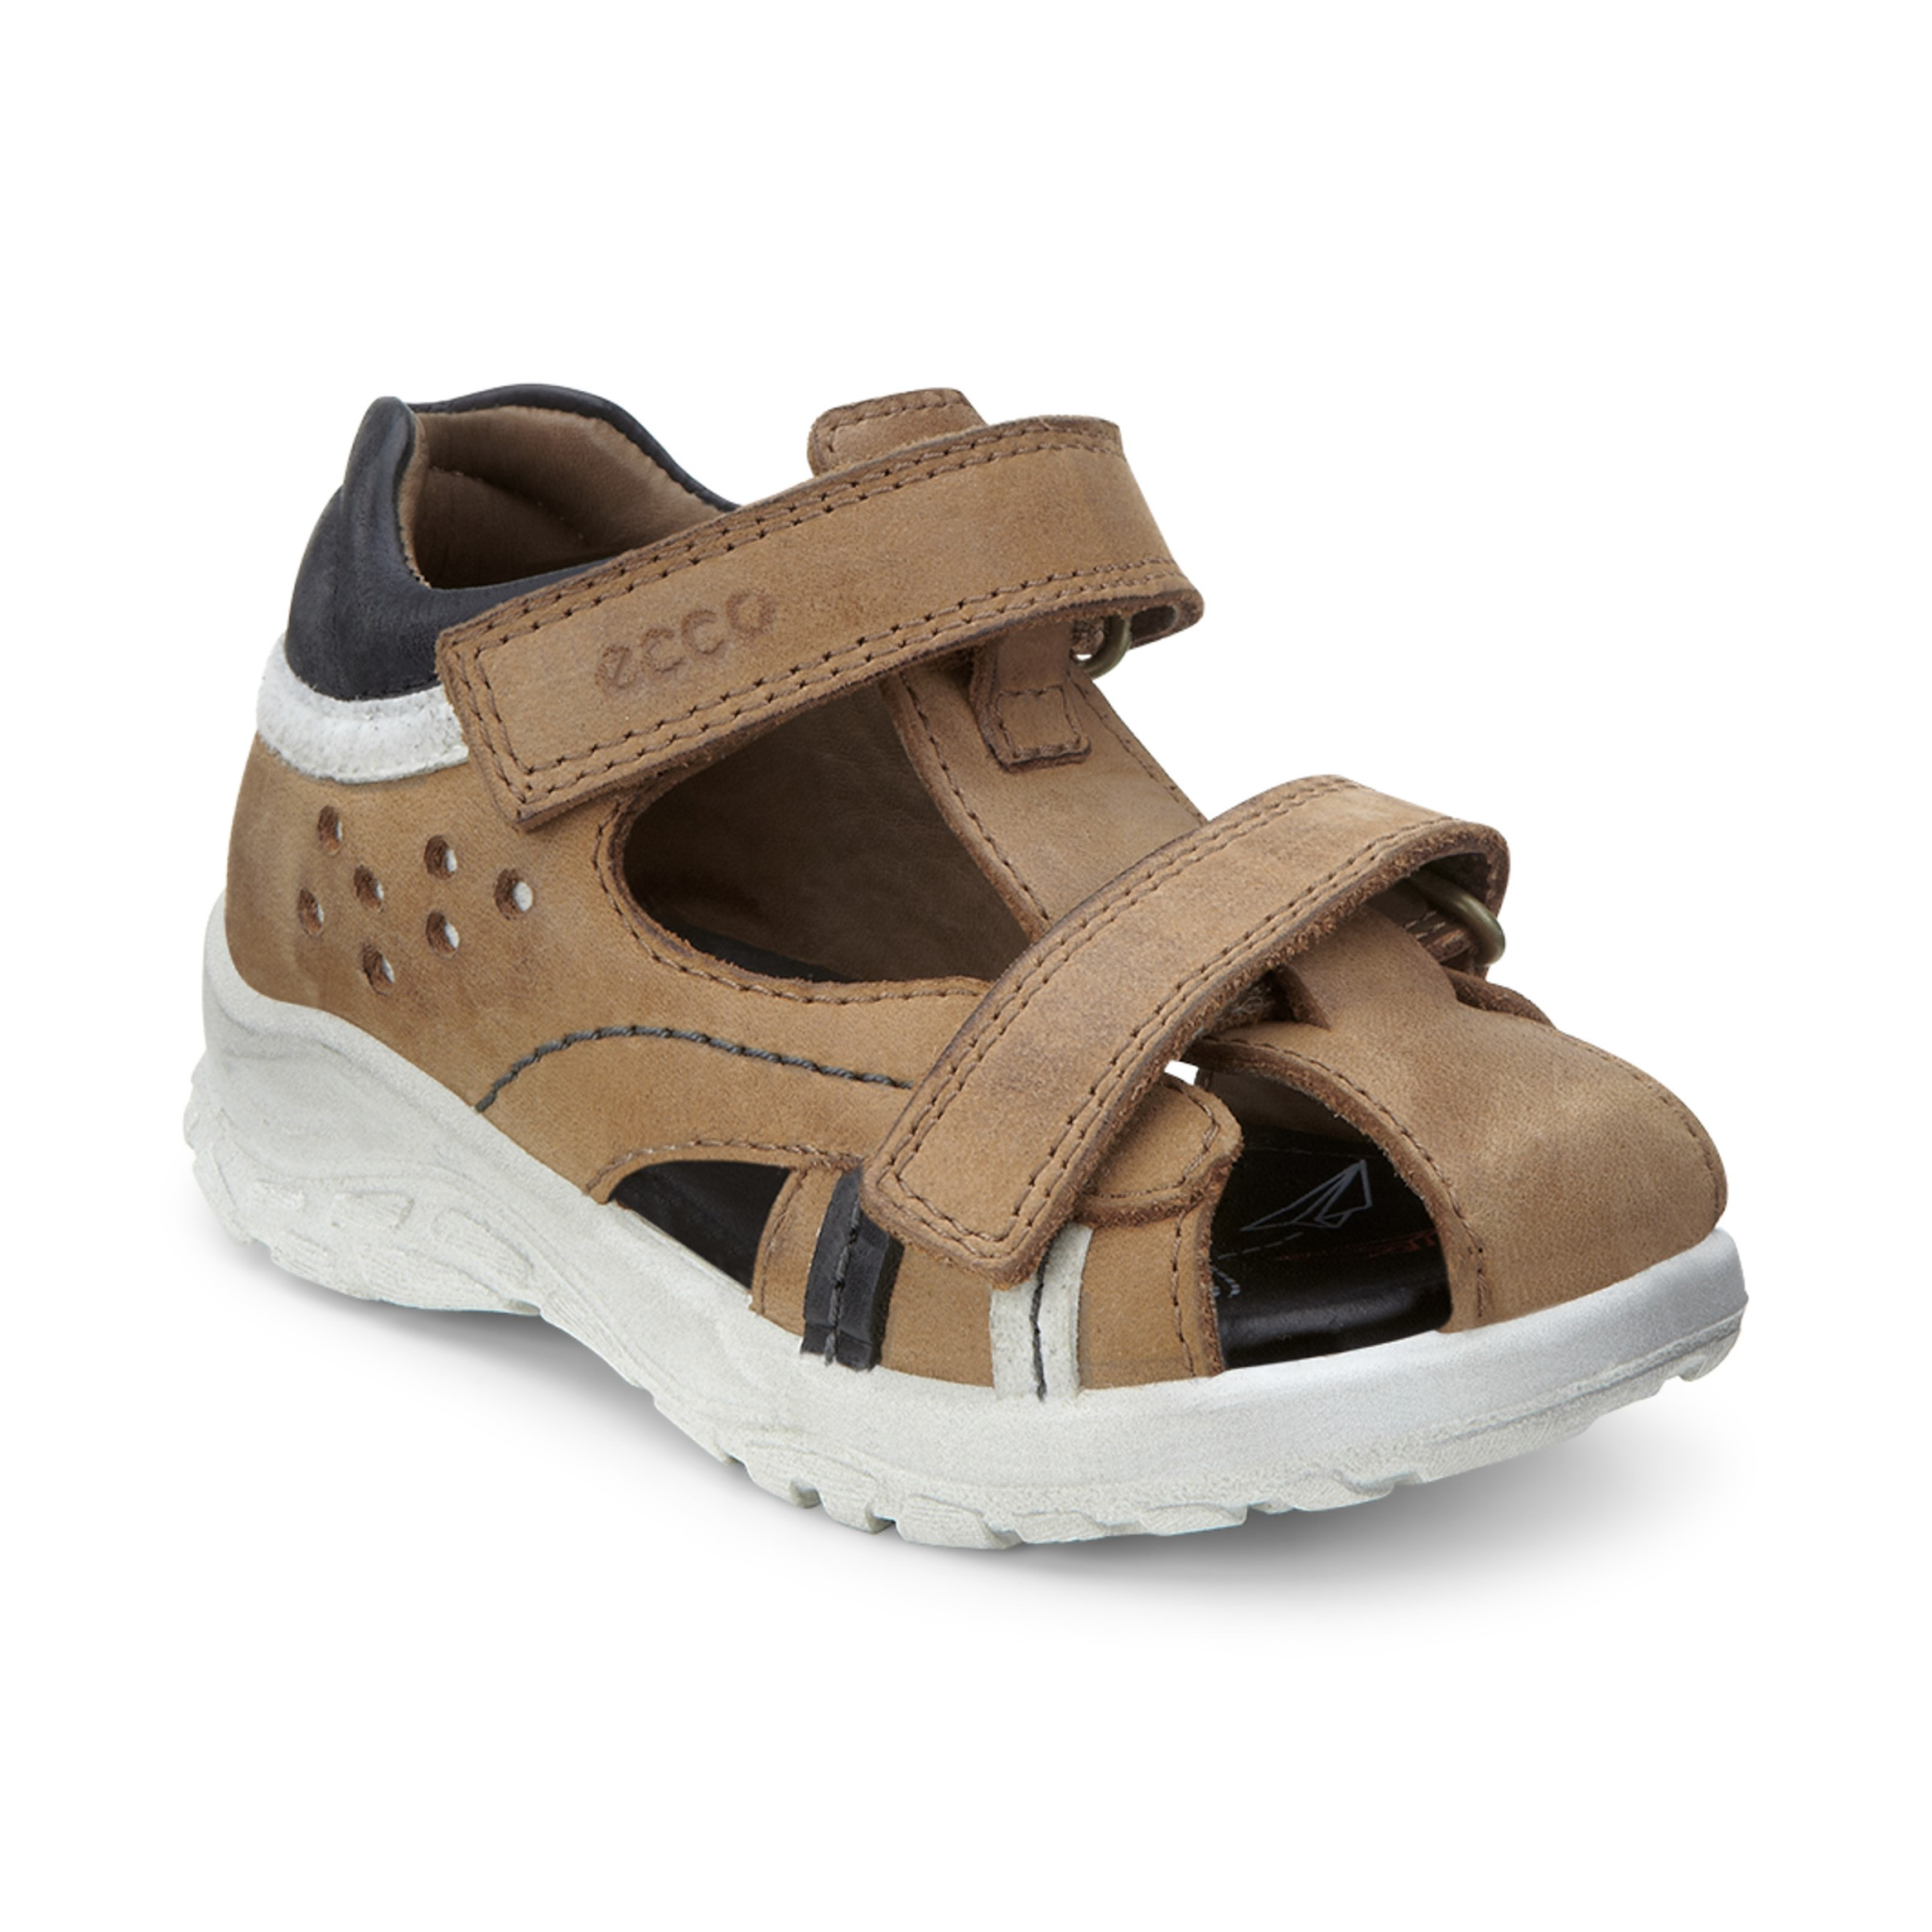 Ecco Peekaboo Infants Sandal - Products - Veryk Mall - Veryk Mall, many product, response, safe your